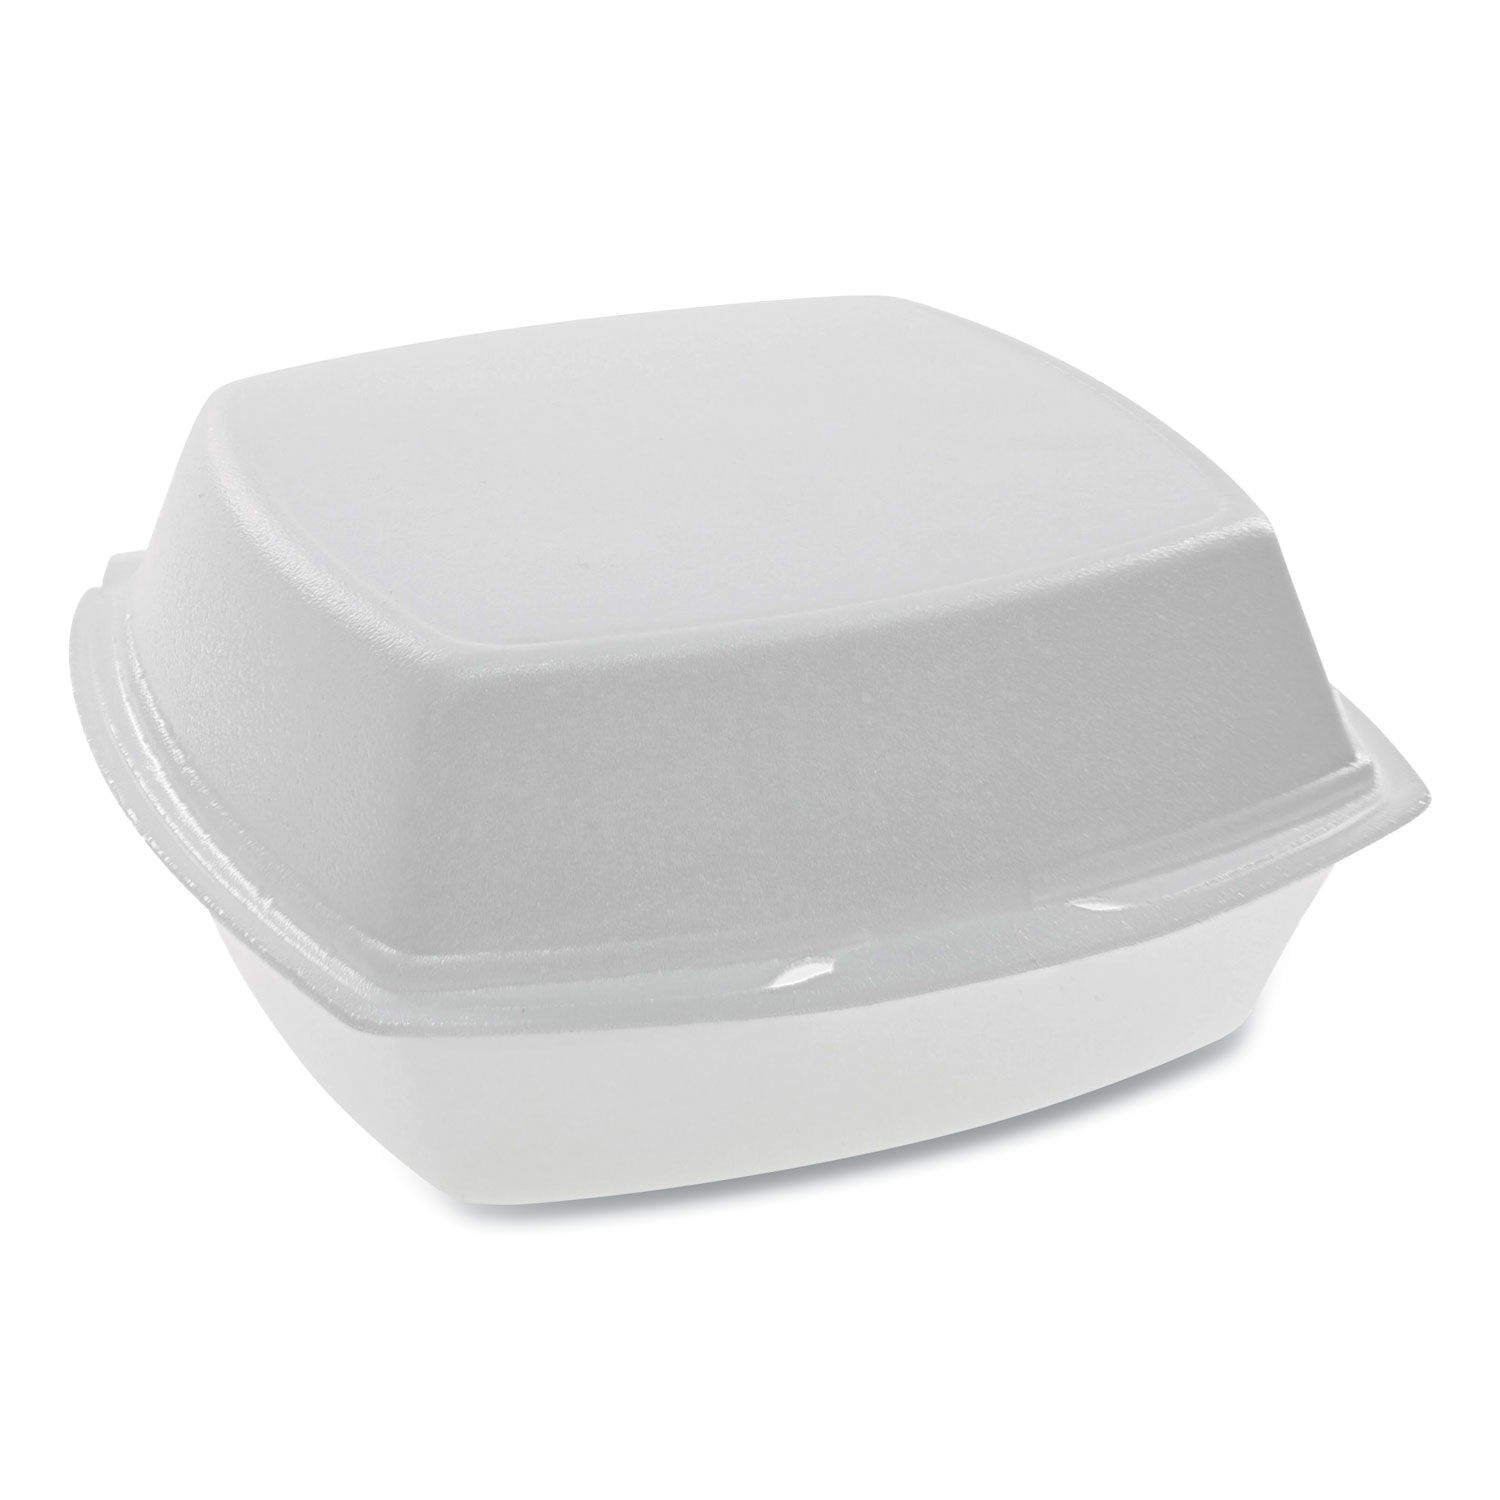  Pactiv YTH100800000 Foam Hinged Lid Containers, Single Tab Lock, 6.38 x 6.38 x 3, 1-Compartment, White, 500/Carton (PCTYTH100800000) 